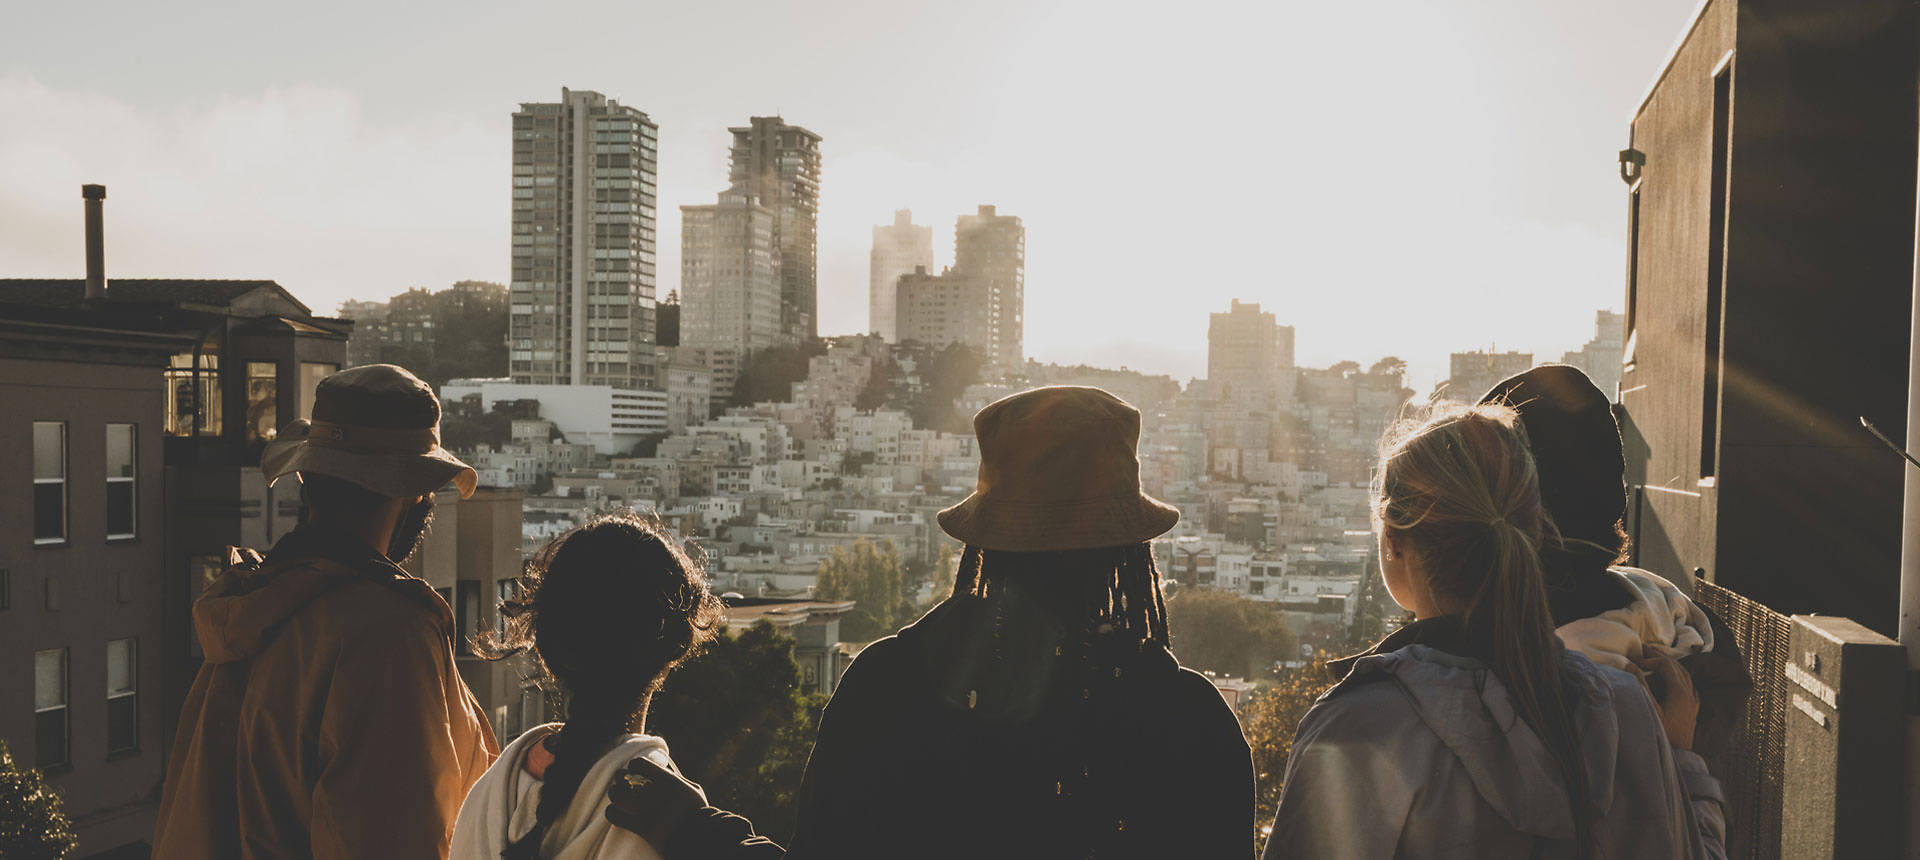 Five friends standing together and wearing Timberland jackets and hats, shown from the back. with the sun lighting up their silhouettes as they look out upon a city with white buildings.